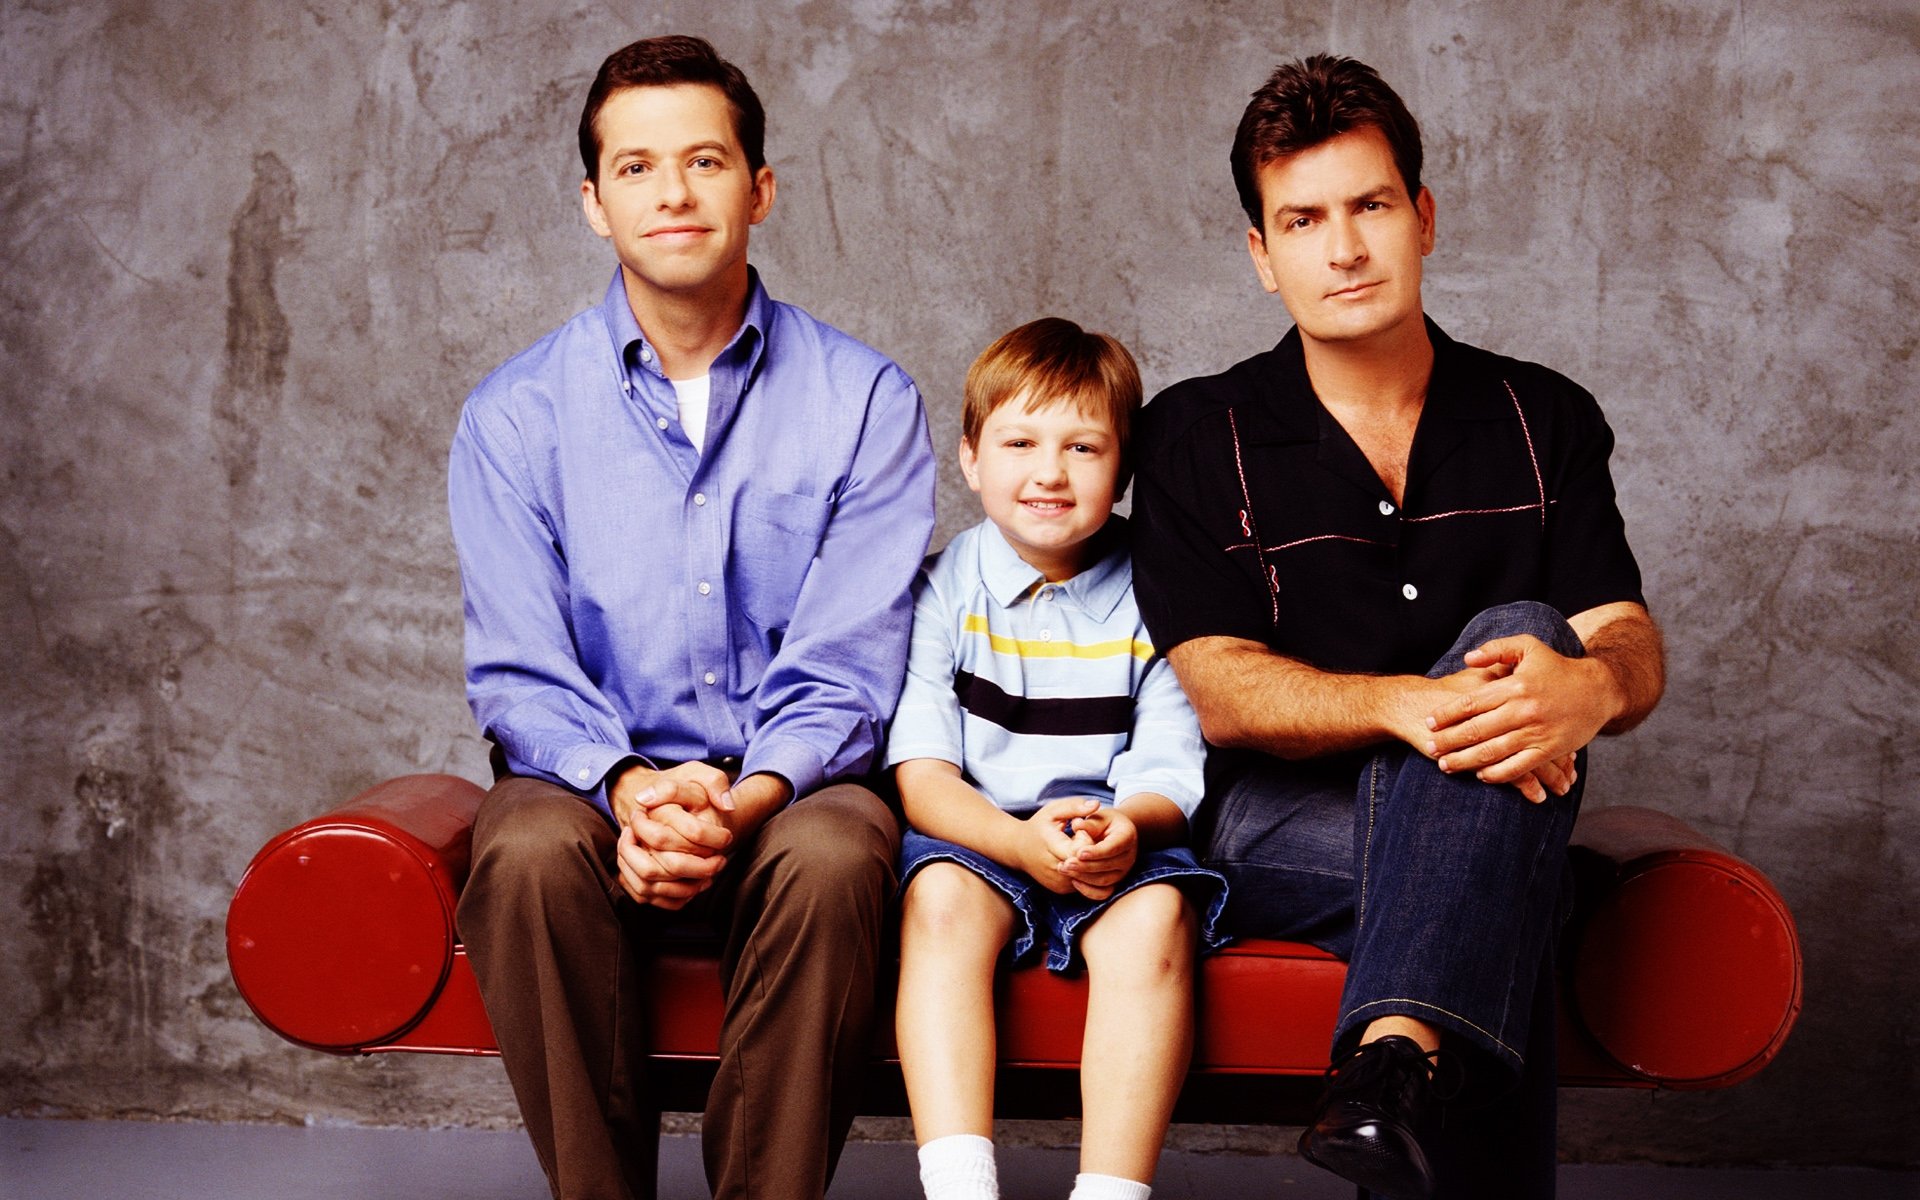 two and a half men, Comedy, Television, Series, Two, Half, Men